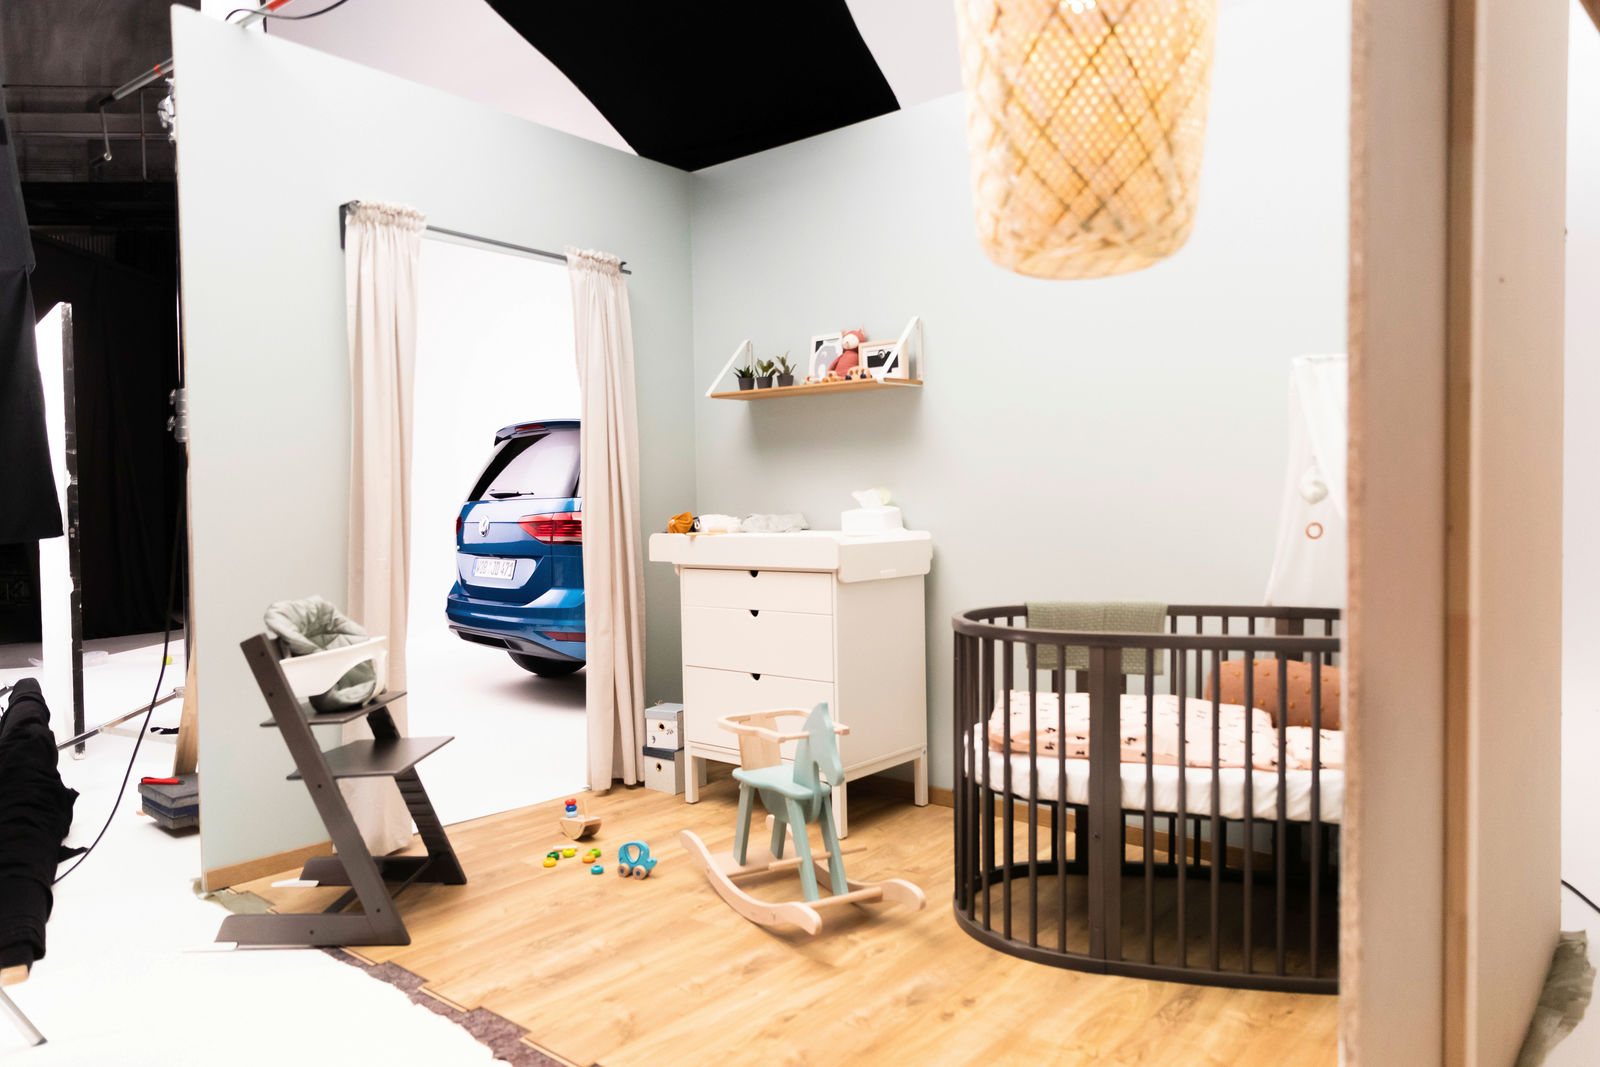 Story "Enough space for a whole child’s room?"